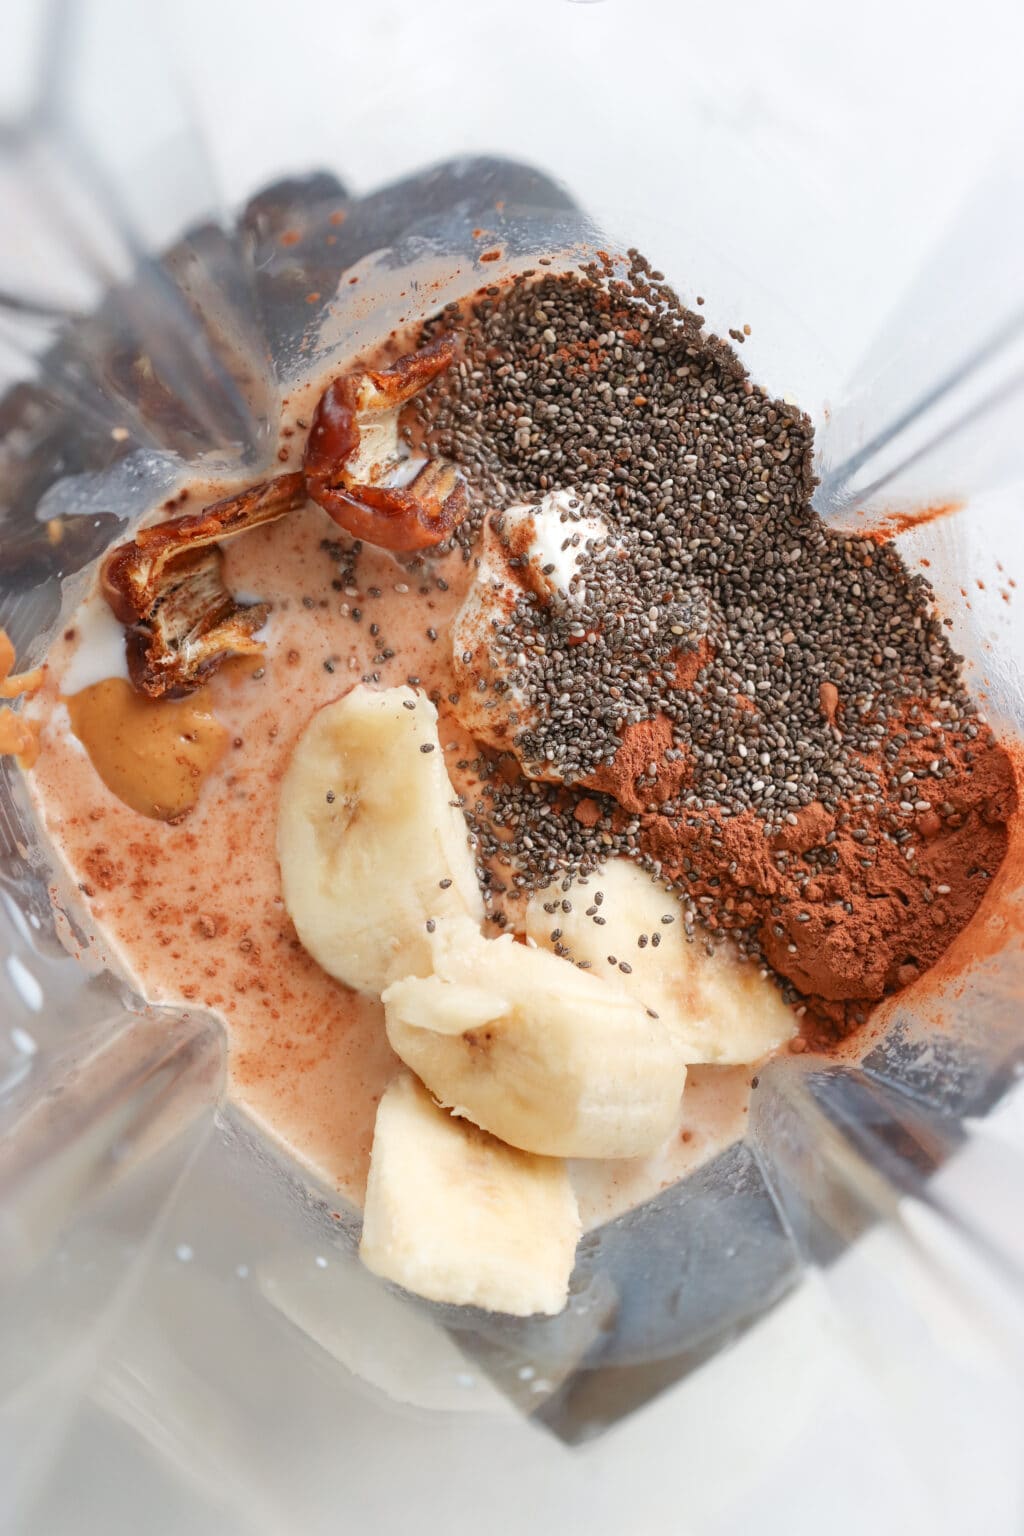 Ingredients for a 5 minute chocolate banana chia seed smoothie in a blender, including milk, chia seeds, cocoa, Greek yogurt, banana, nut, and a medjool date